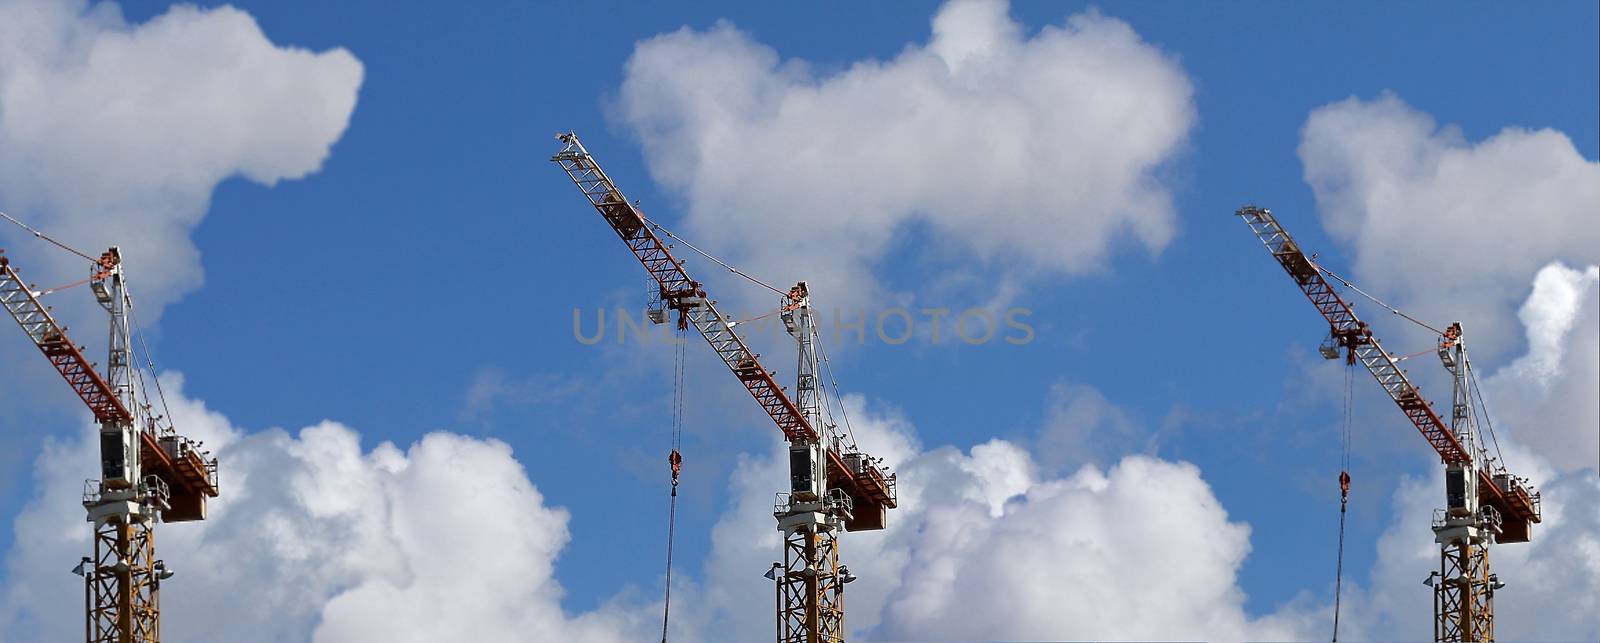 Three tower cranes on a background of blue sky and white clouds